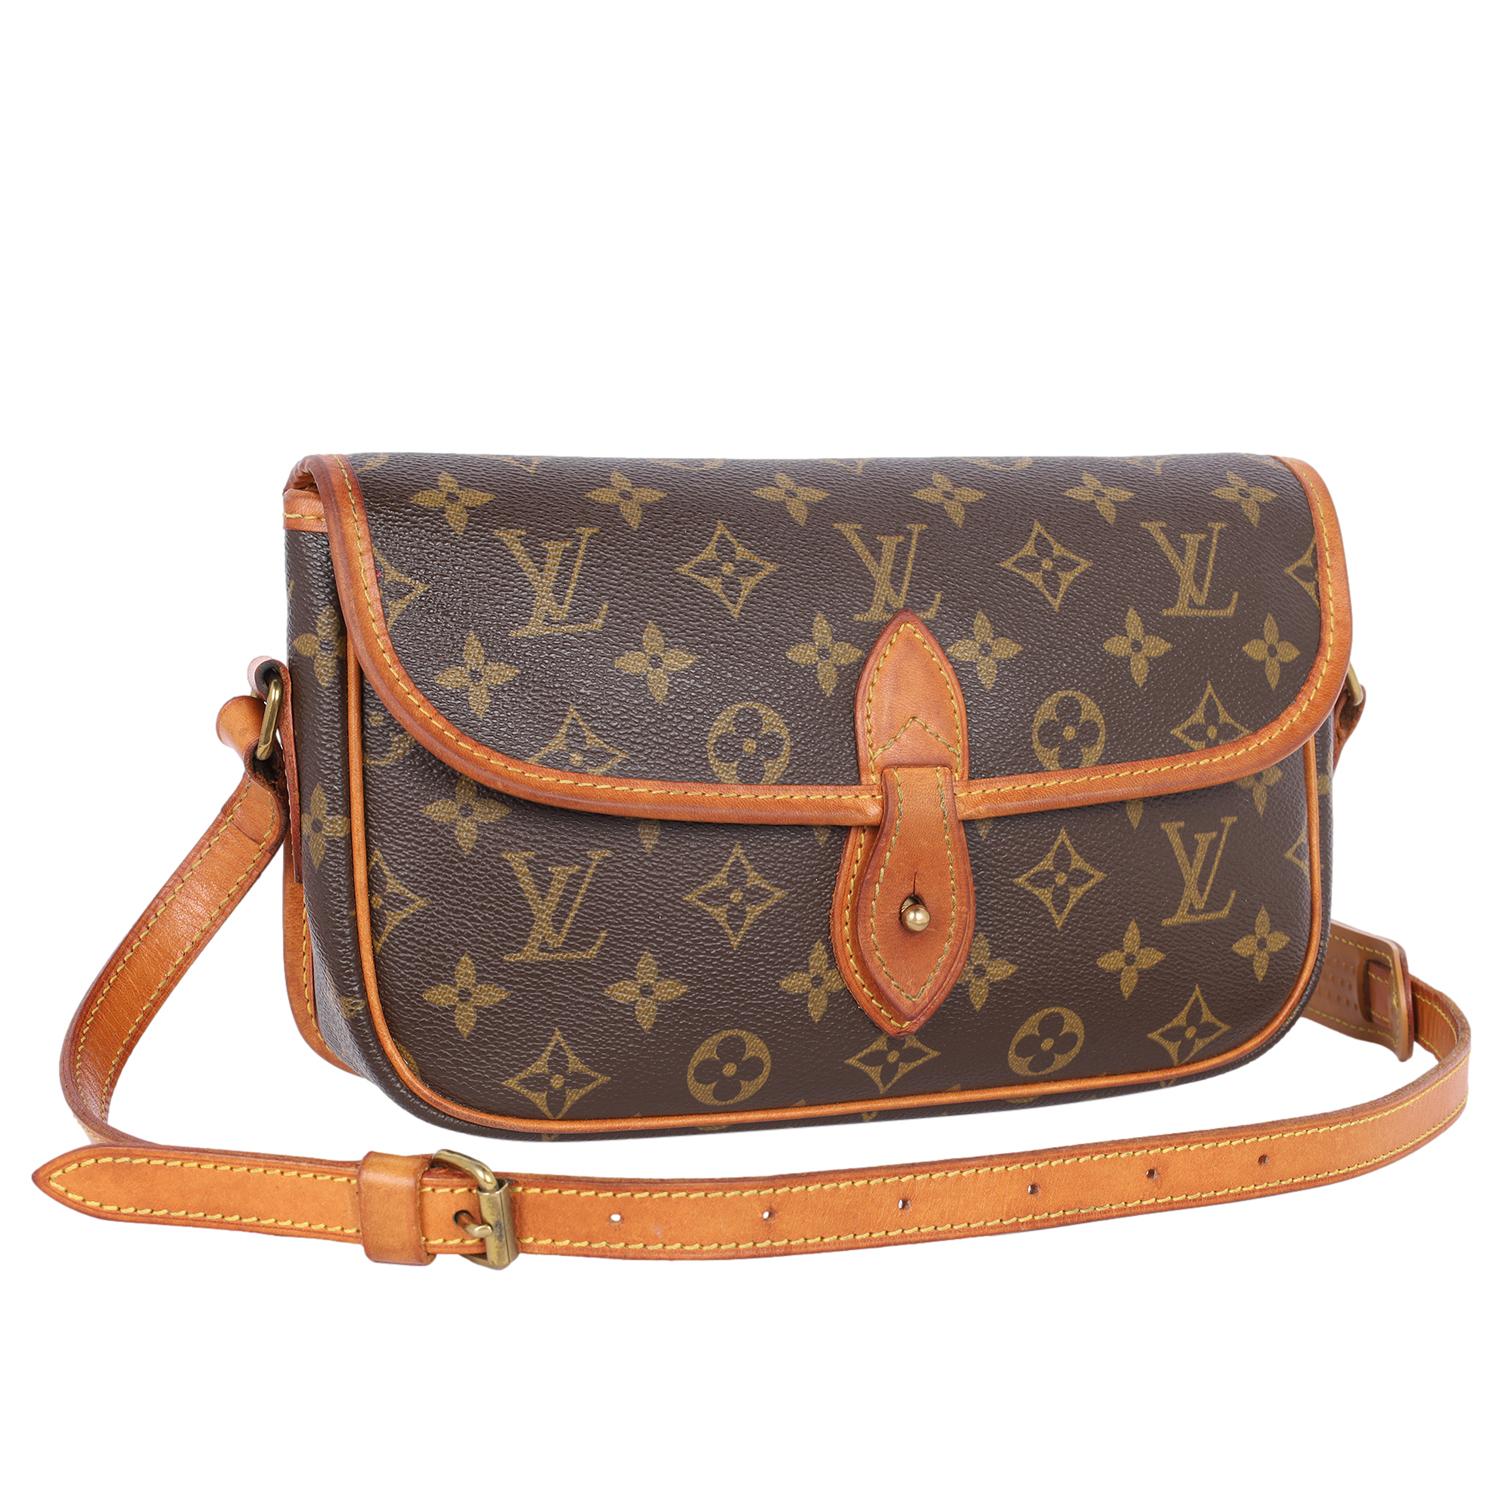 Authentic, pre-owned Louis Vuitton Sologne shoulder cross body bag. This classic brown monogram cross body bag makes a perfect everyday bag. Features monogram canvas, leather accents, front flap closure with buckle, rear slip pocket, large textile